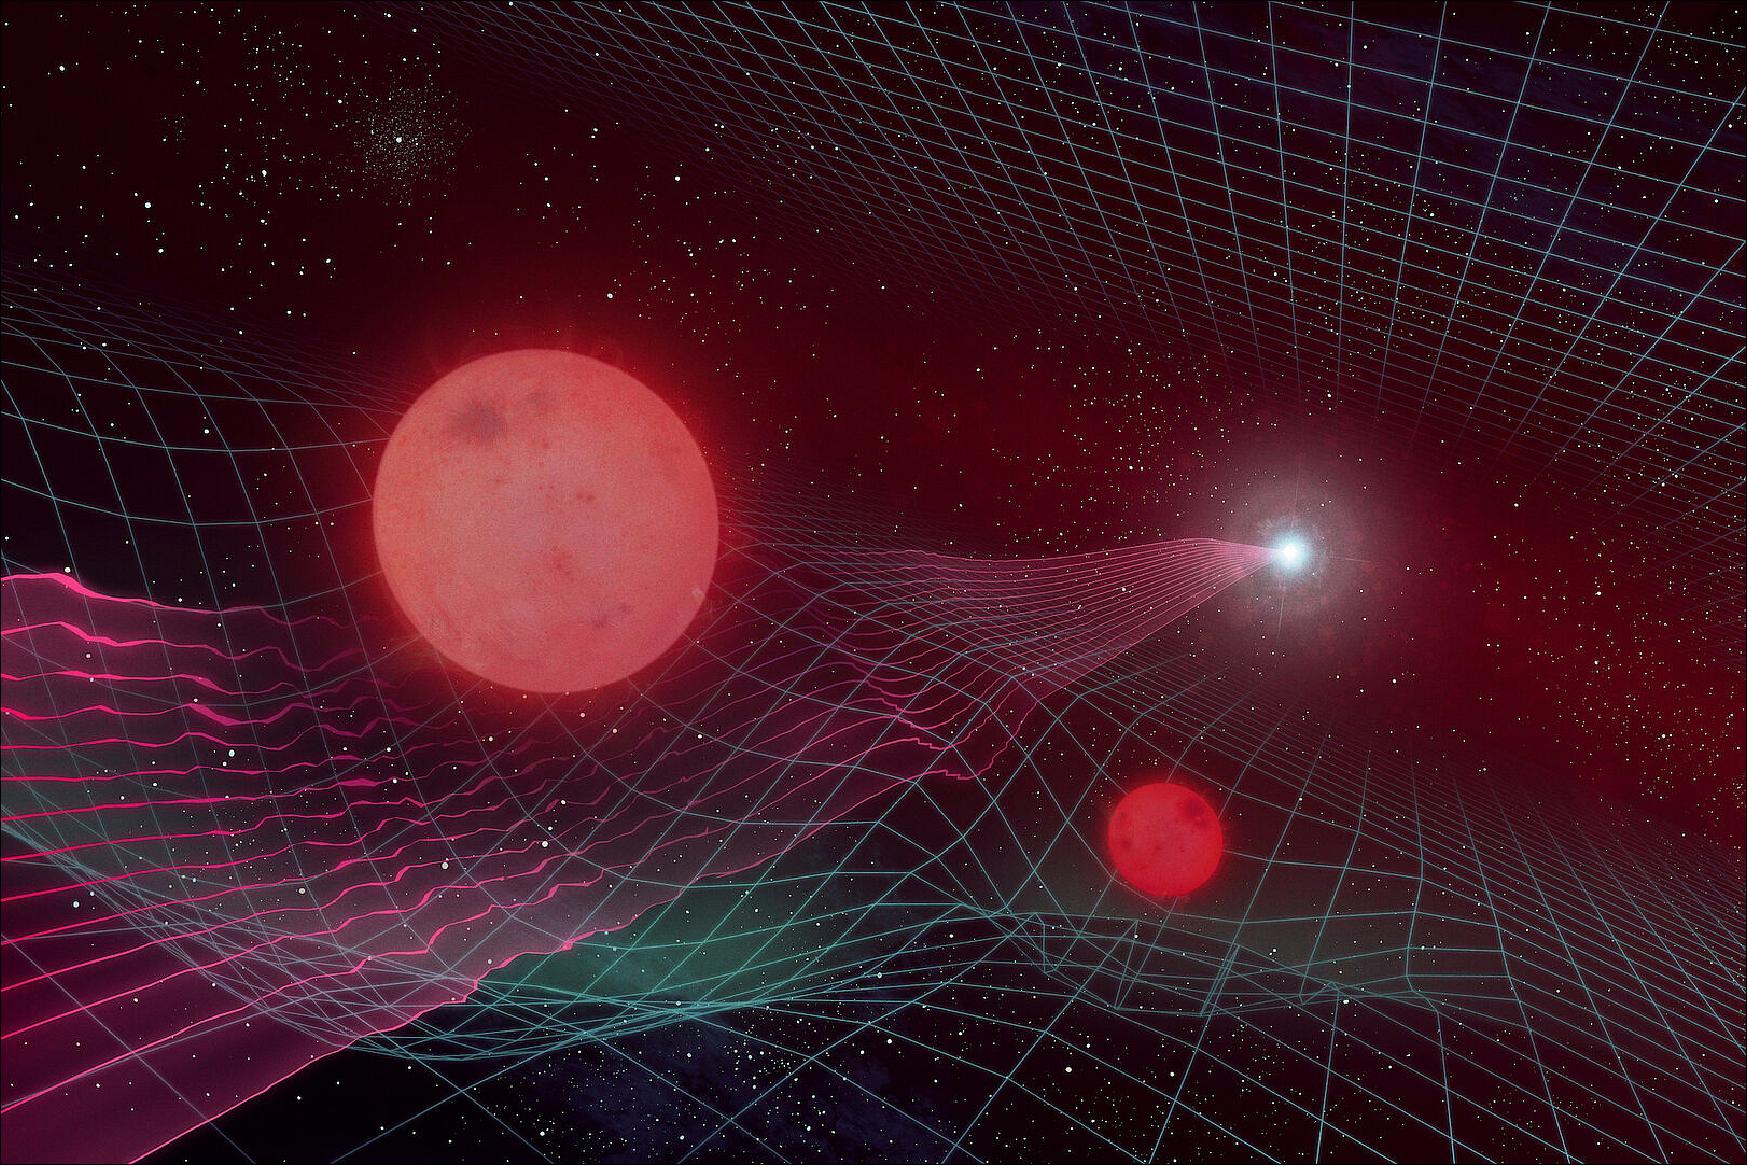 Figure 76: Artist's impression of the binary stellar system discovered in the Gaia16aye microlensing event, its gravity bending the fabric of spacetime and distorting the path of light rays coming from an even more distant star (image credit: M. Rębisz) 78)